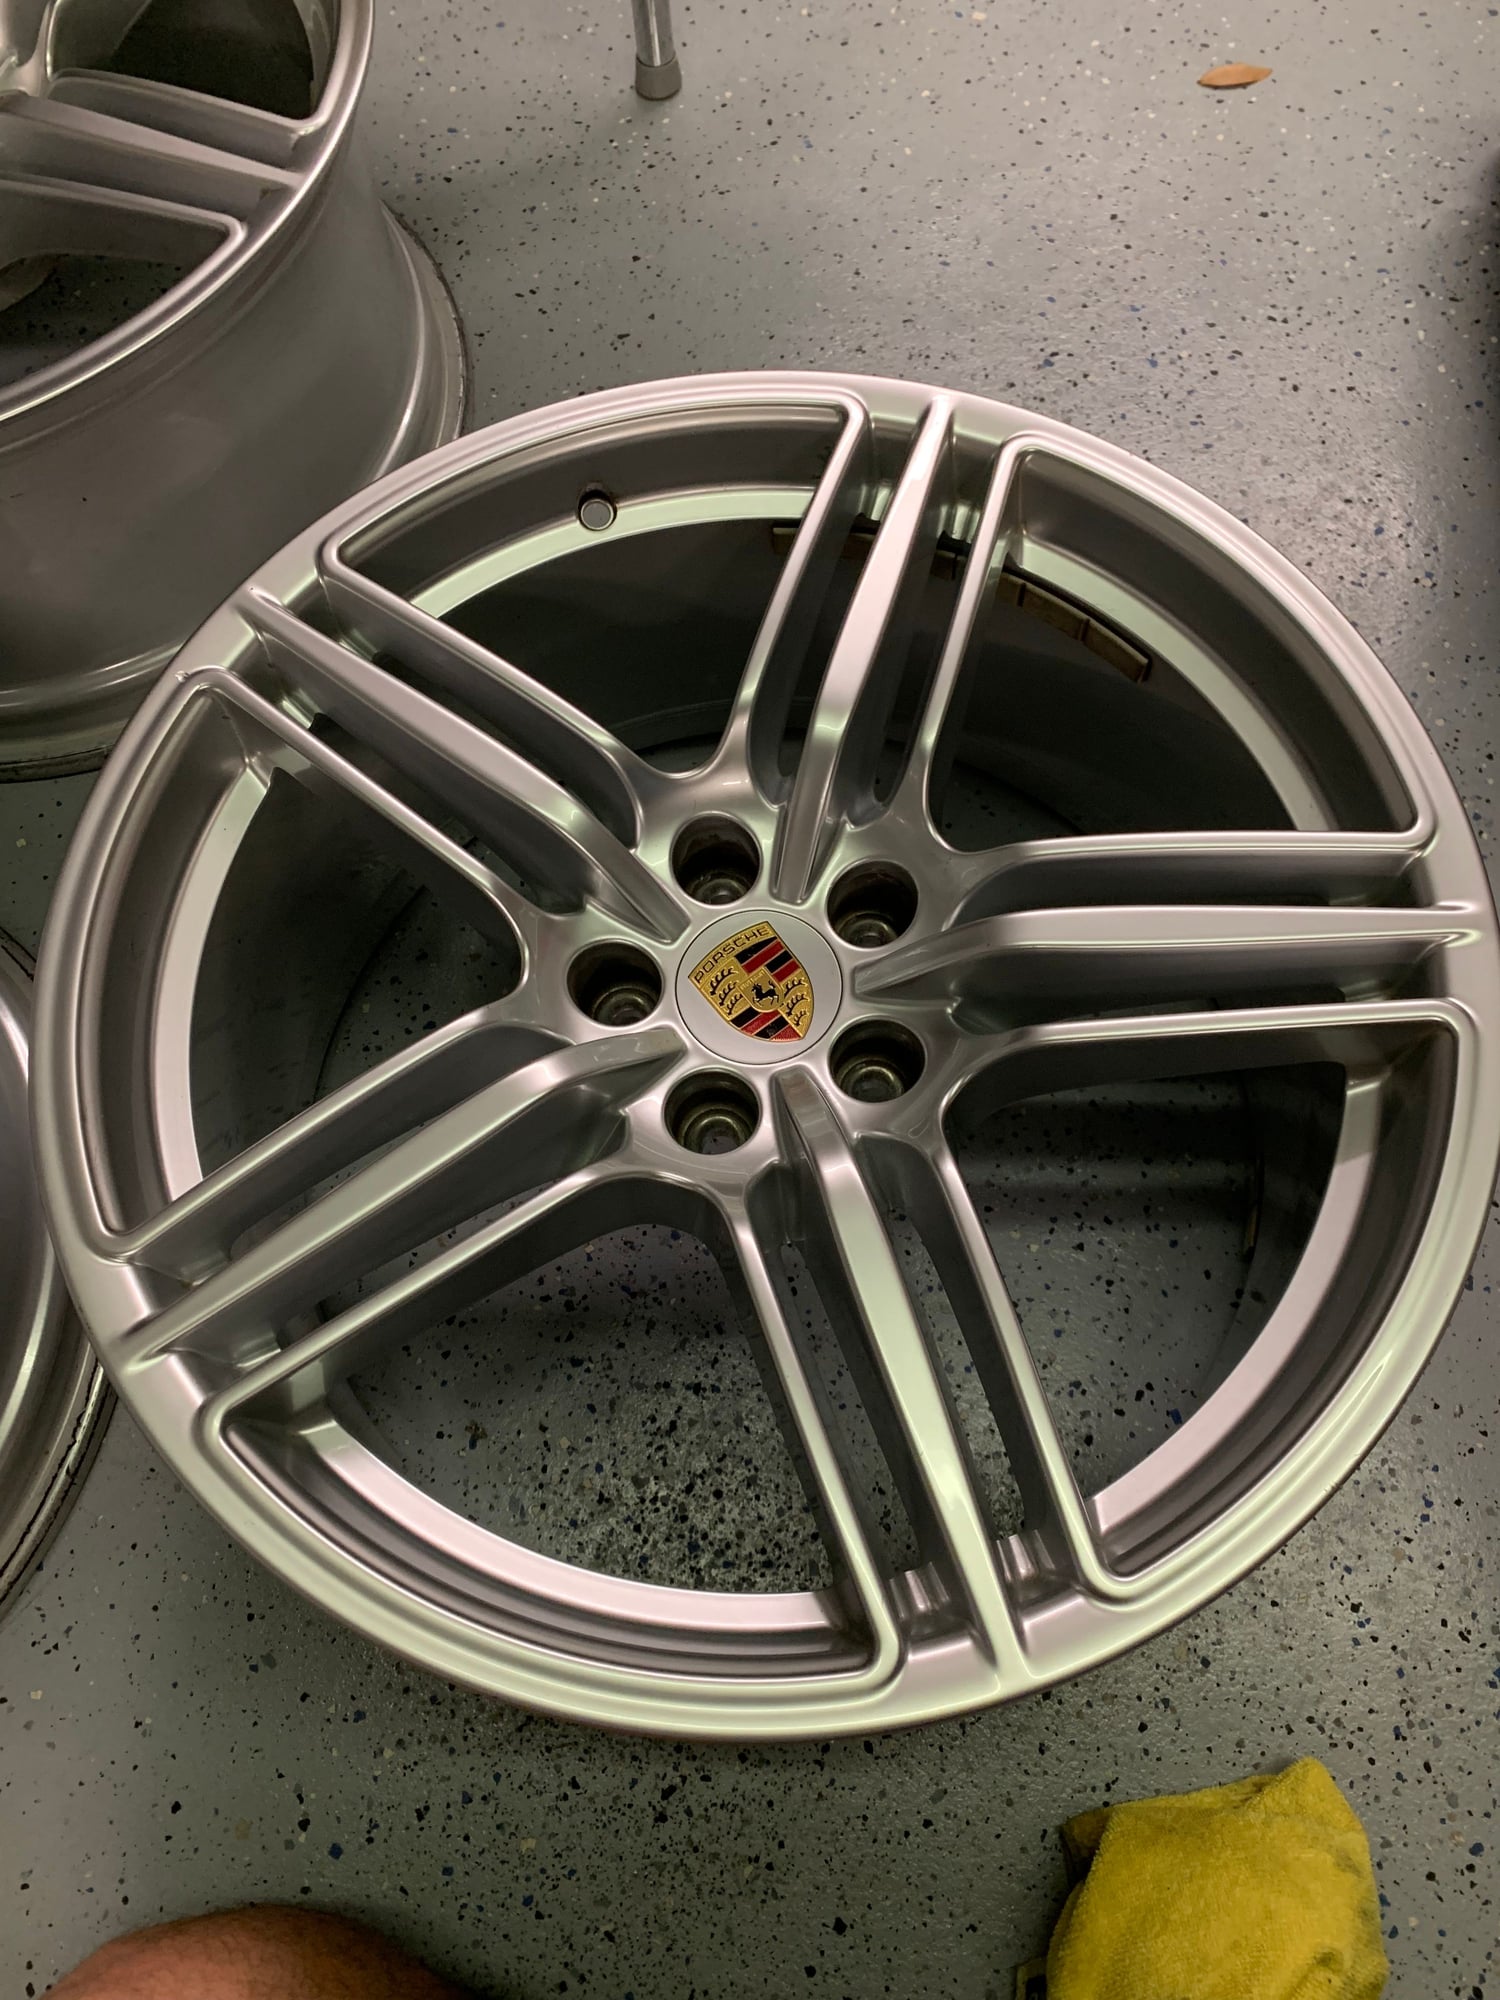 Wheels and Tires/Axles - 19" Macan Design Wheels For Sale - Used - 2015 to 2018 Porsche Macan - Jacksonville, FL 32225, United States